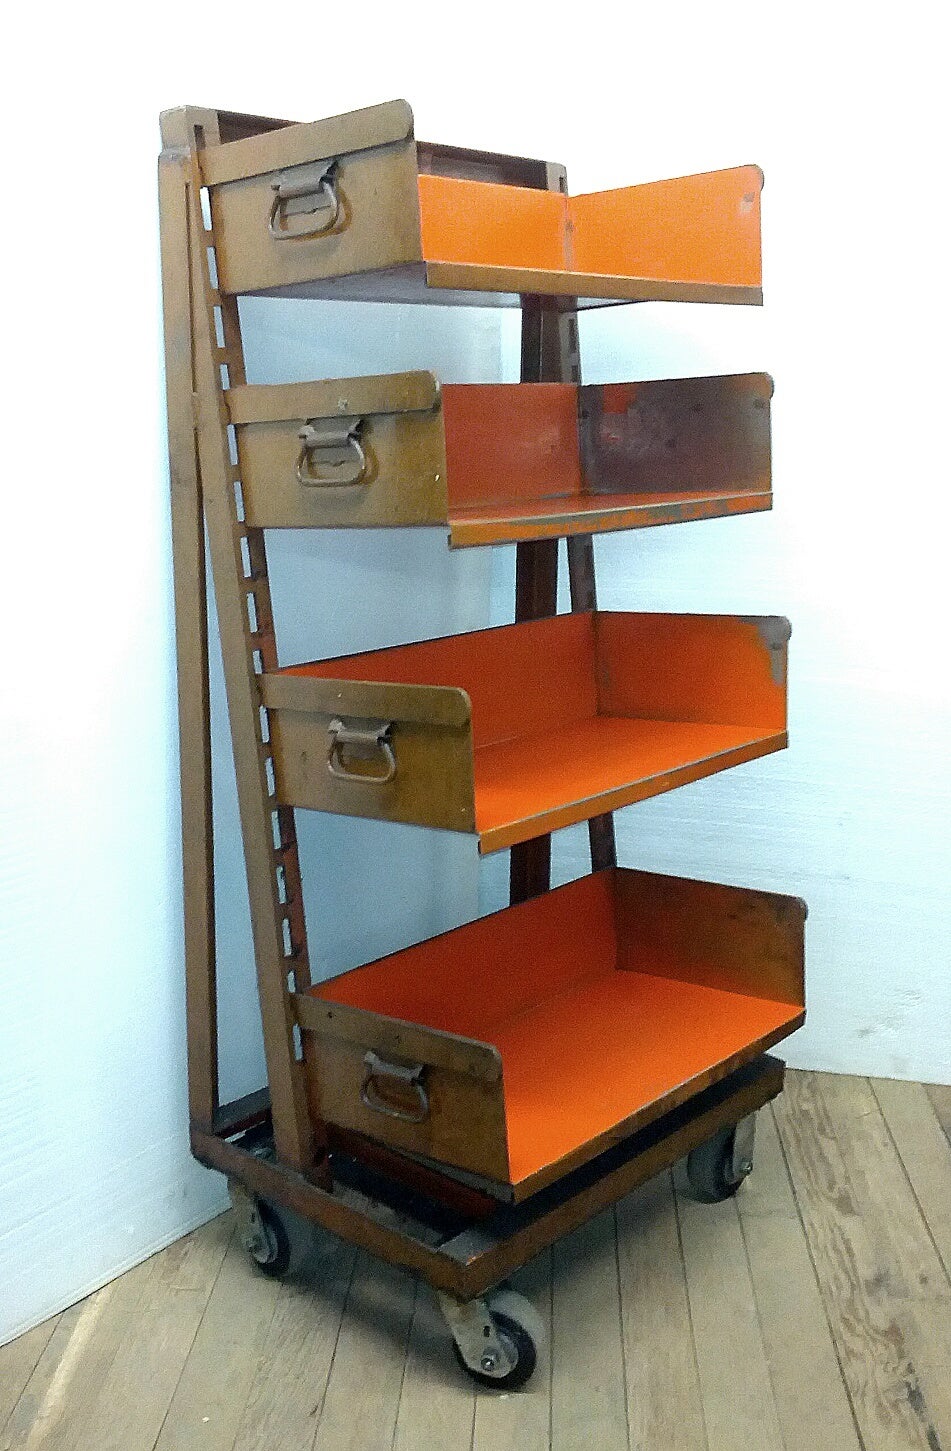 Straight from the factory - but clean and room ready - this early shelving unit add storage to any room. Can also be used as bookcase. Adjustable bins. Casters allow unit to move easily.